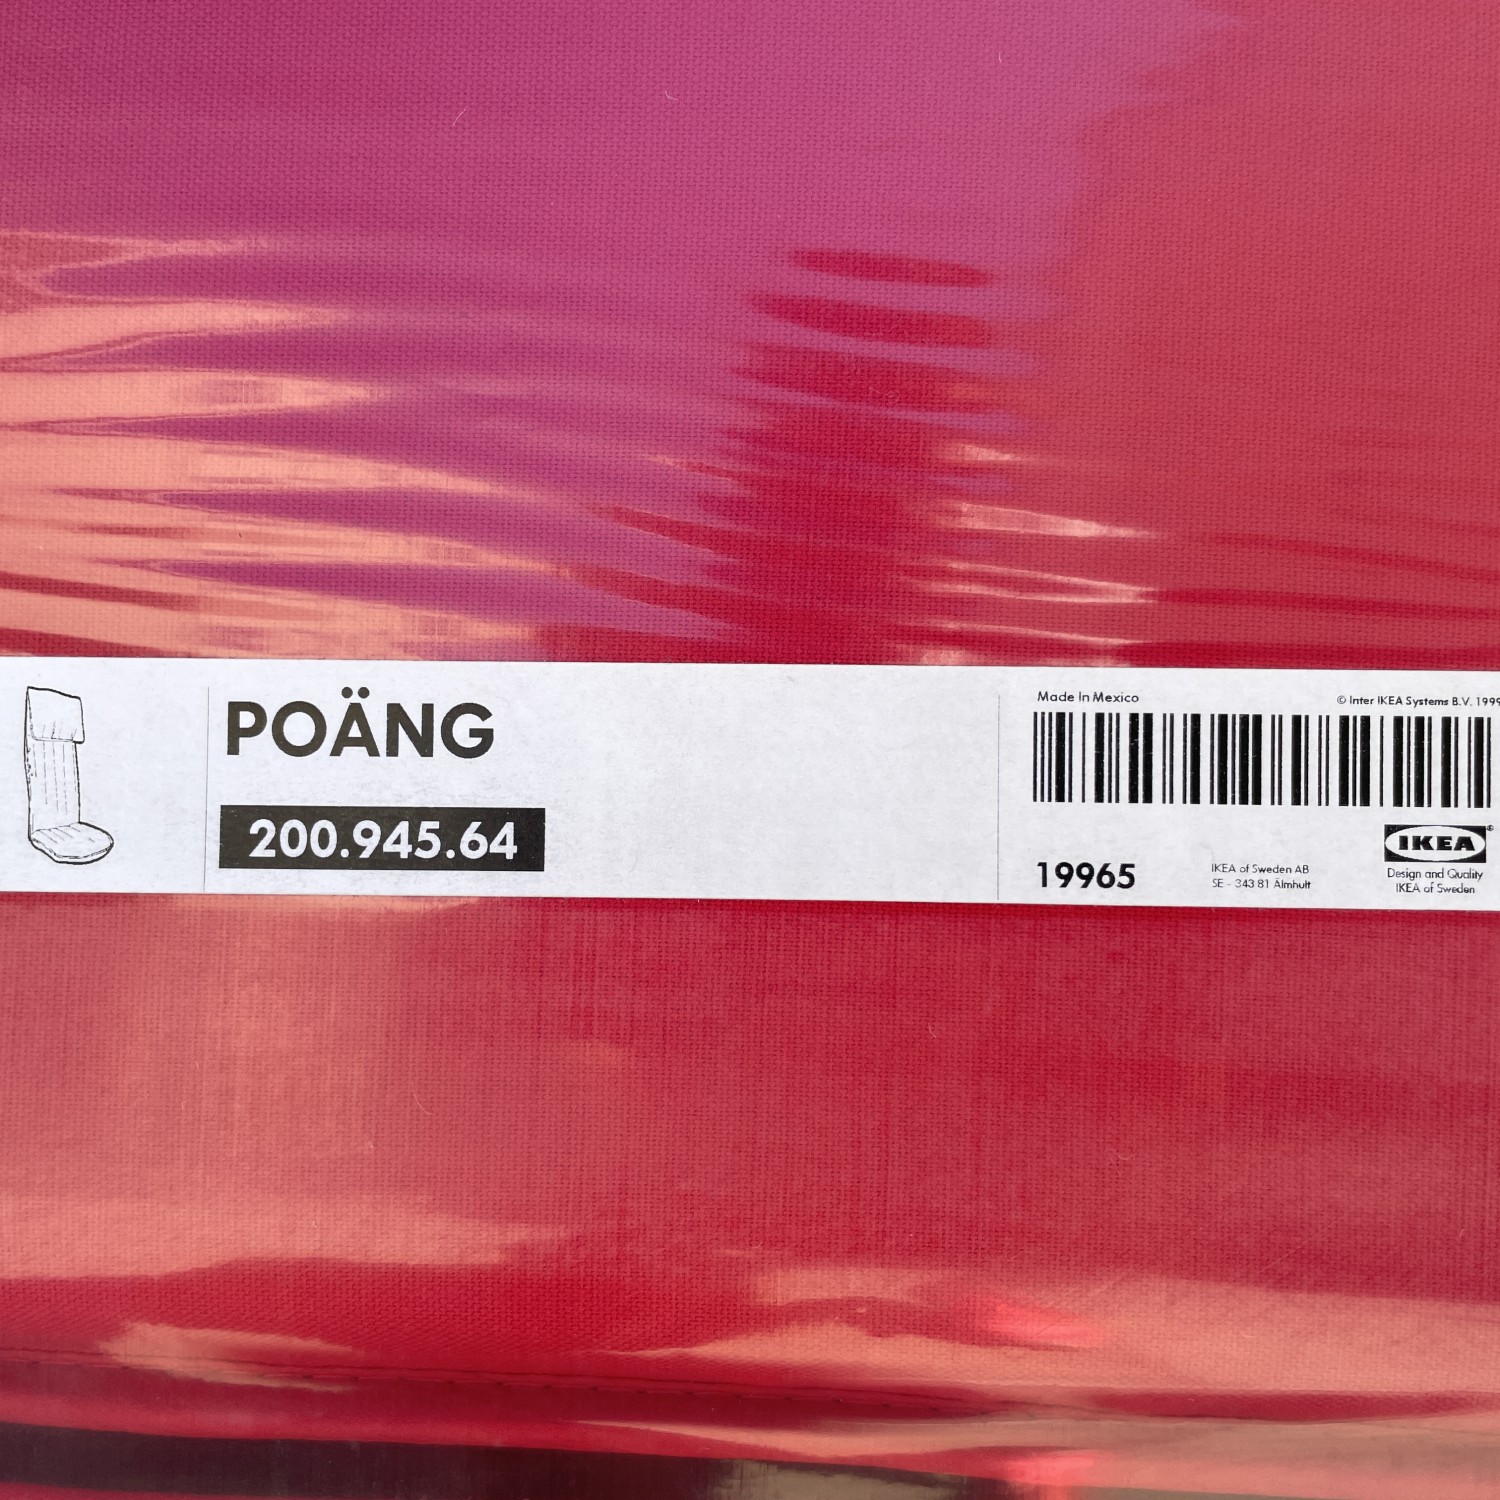 Ikea “Poang” chair and ottoman cushions—NEW